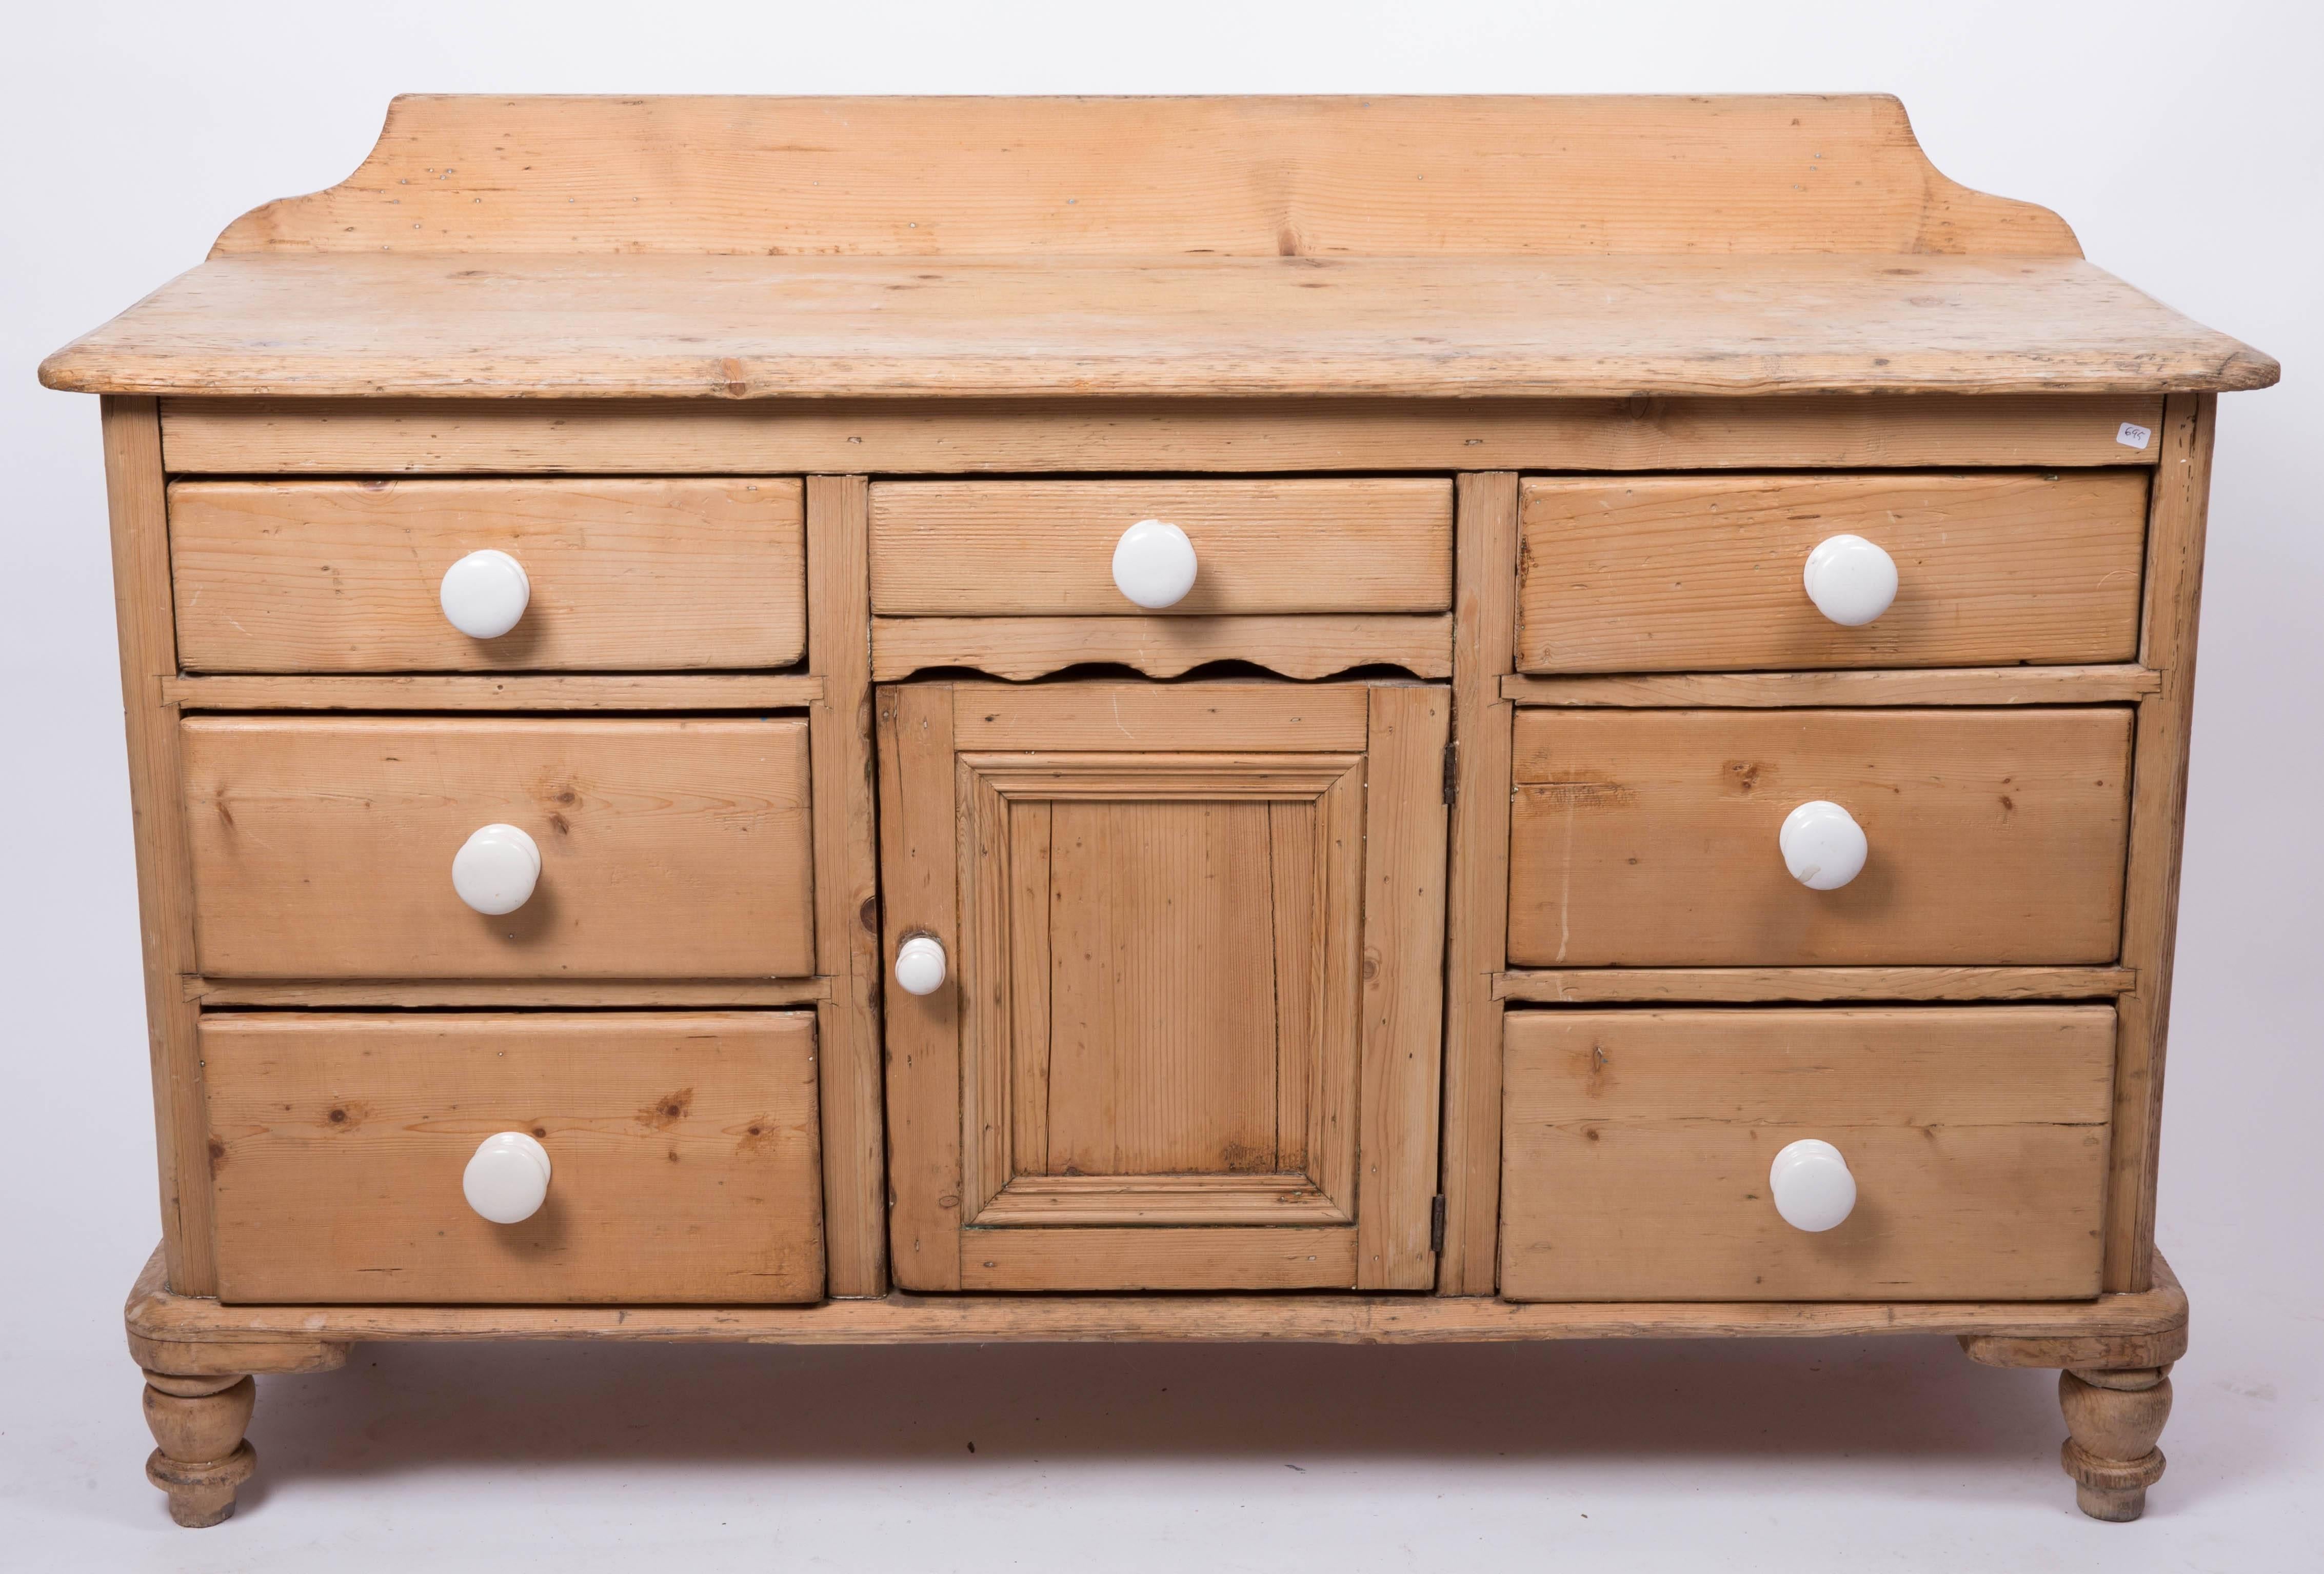 An English Country pine cupboard, console server or sideboard featuring seven drawers, each with white knobs, surrounding a recessed cupboard door and set upon ball feet.